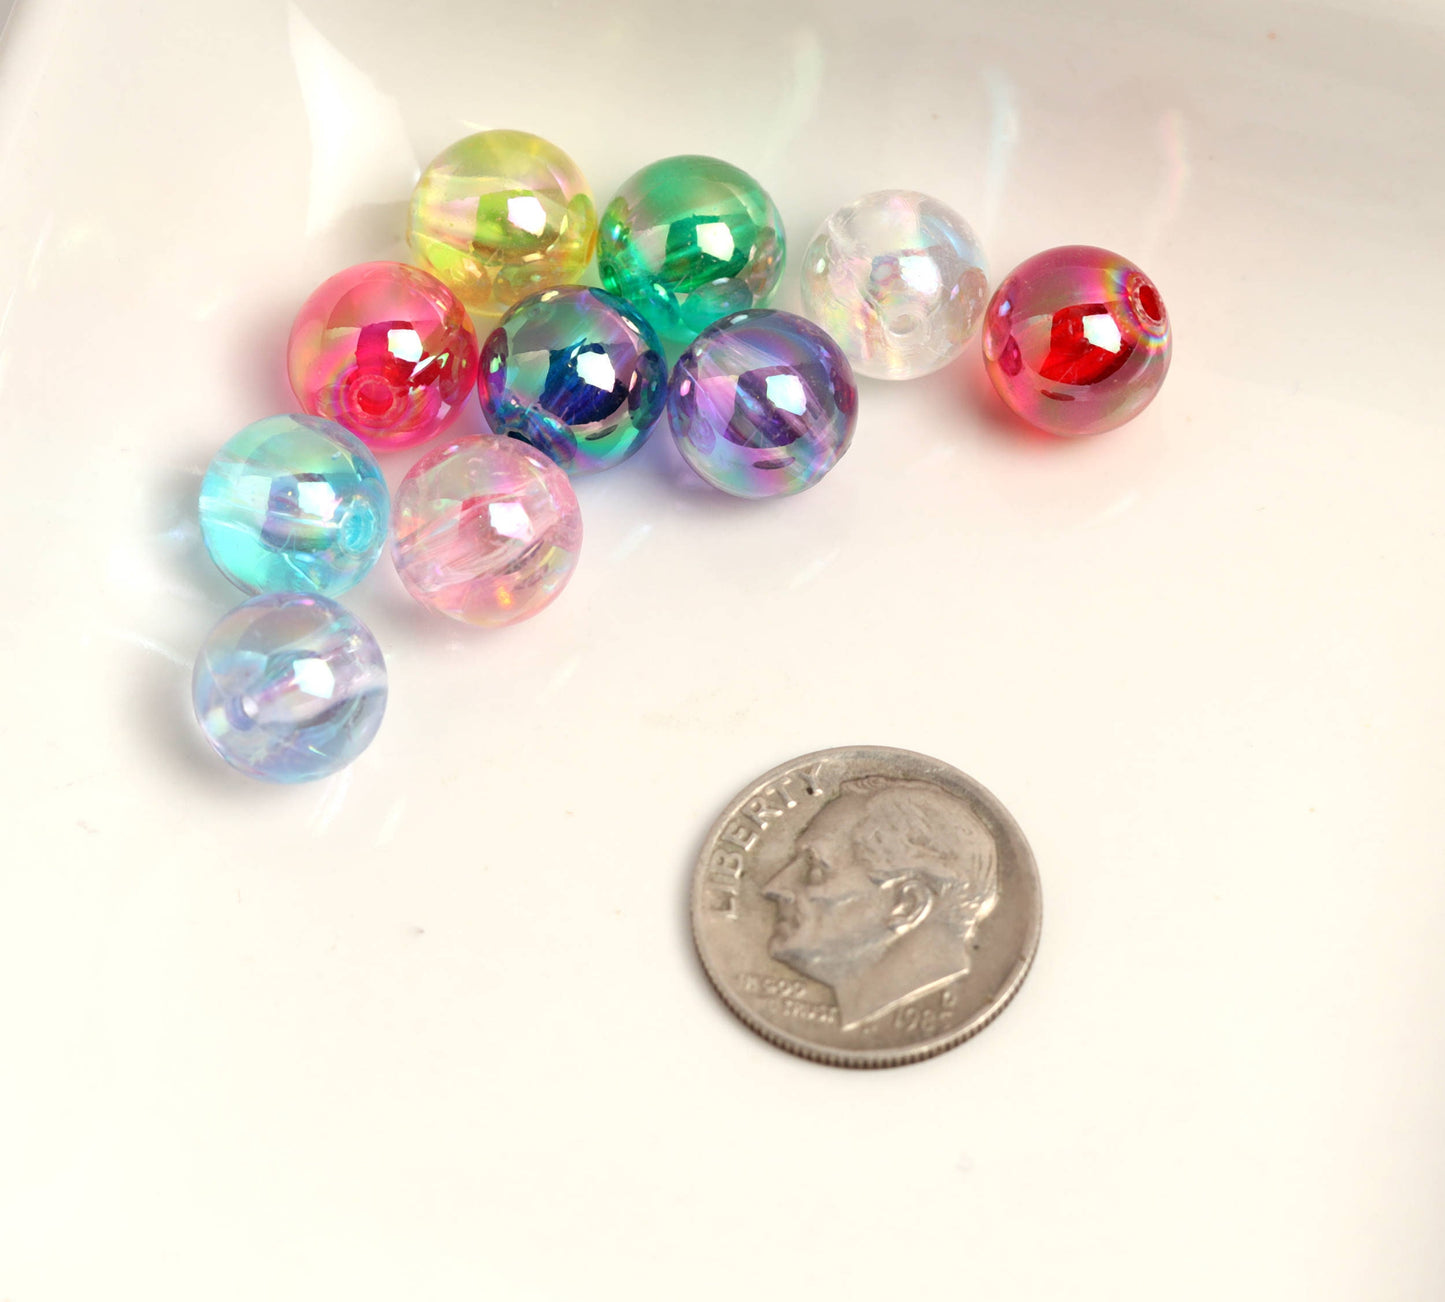 10mm Round Transparent Colorful Spacer Beads for Jewelry Making